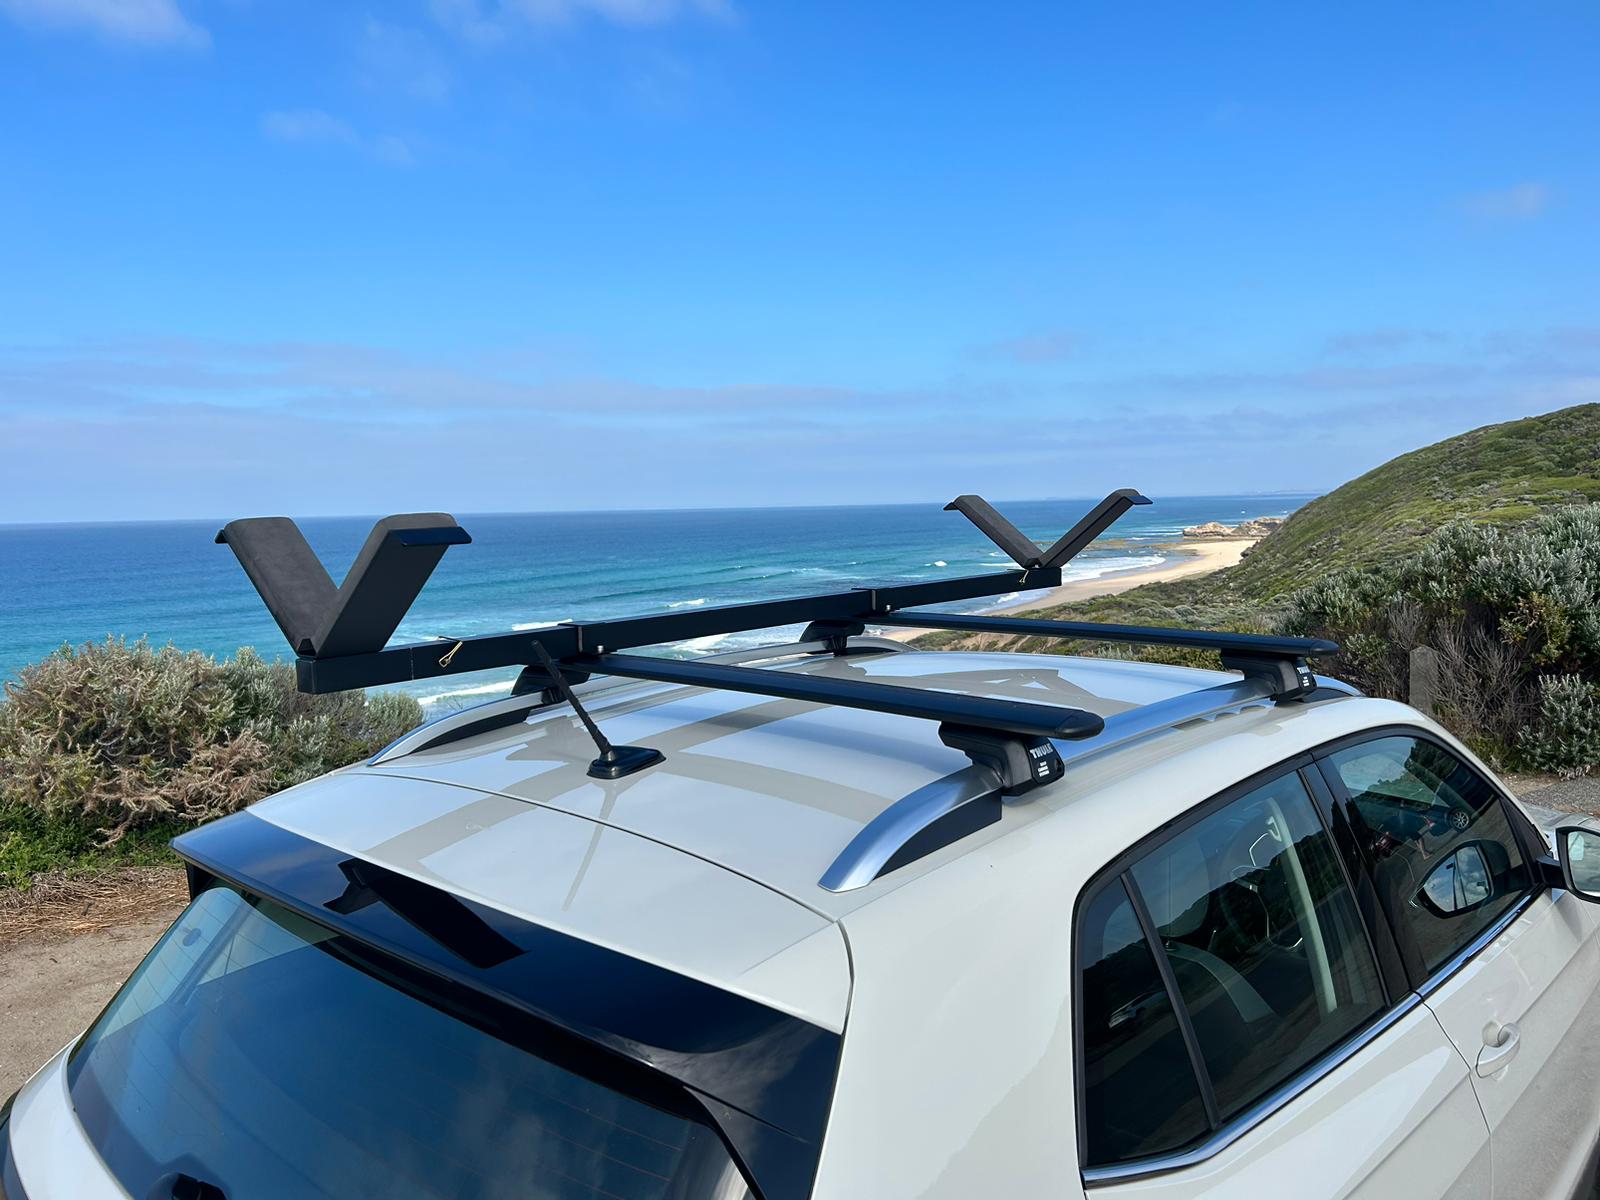 Car with Vrack installed on roof rack, with blue skies and beach background